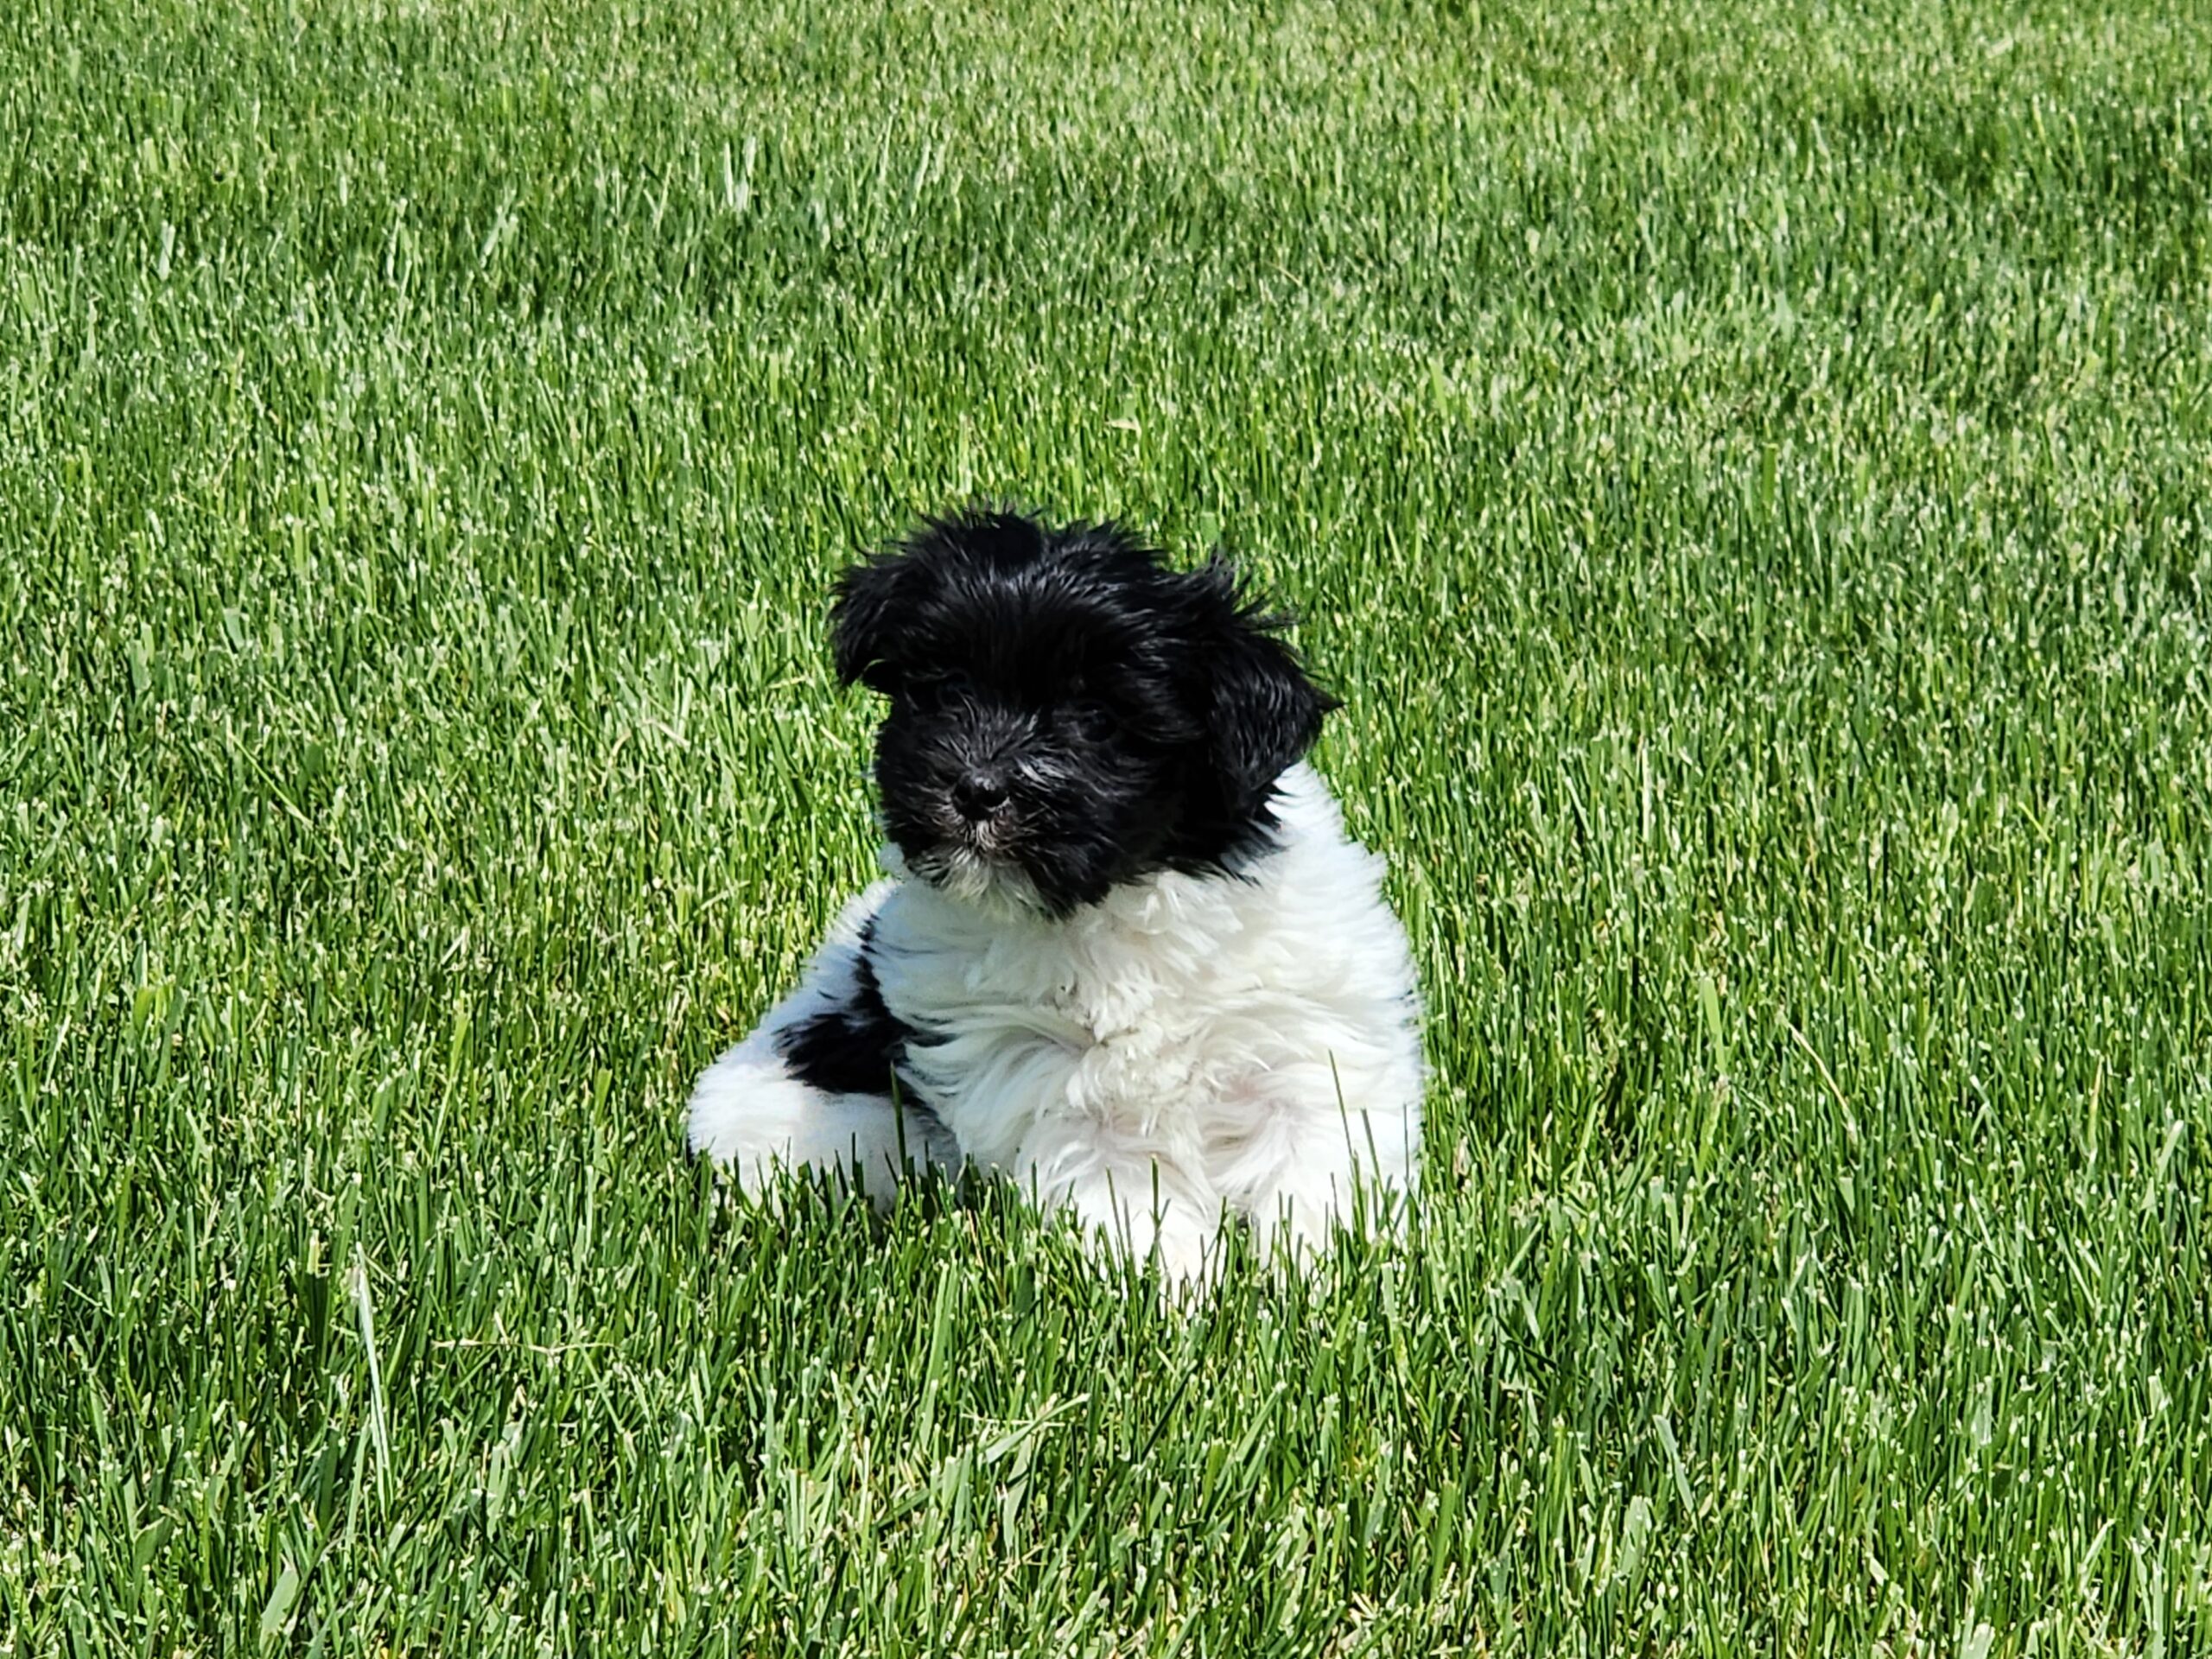 "Jerry" DOB: 3/23/23.  Breed: Havanese.  Sex: Male.  Available June 1. Price: $1500